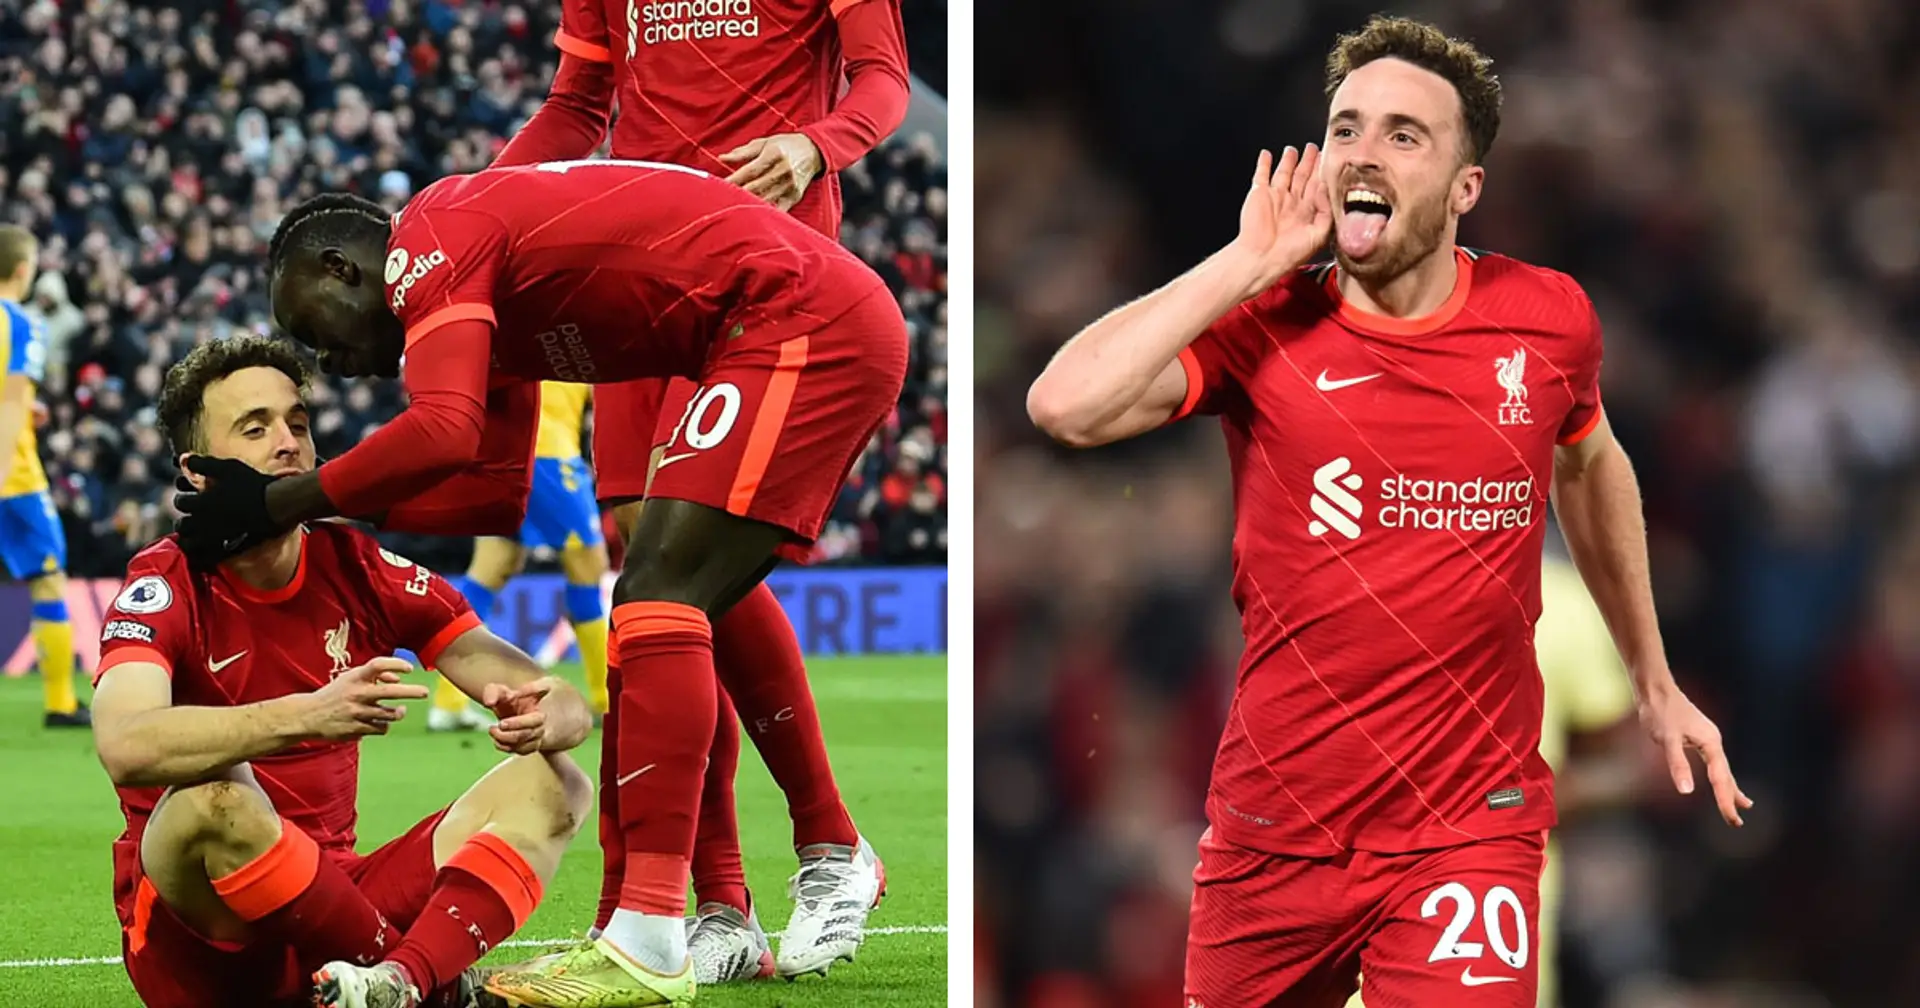 Liverpool forward Diogo Jota 'withdrew from FIFA tournament' before scoring brace against Southampton